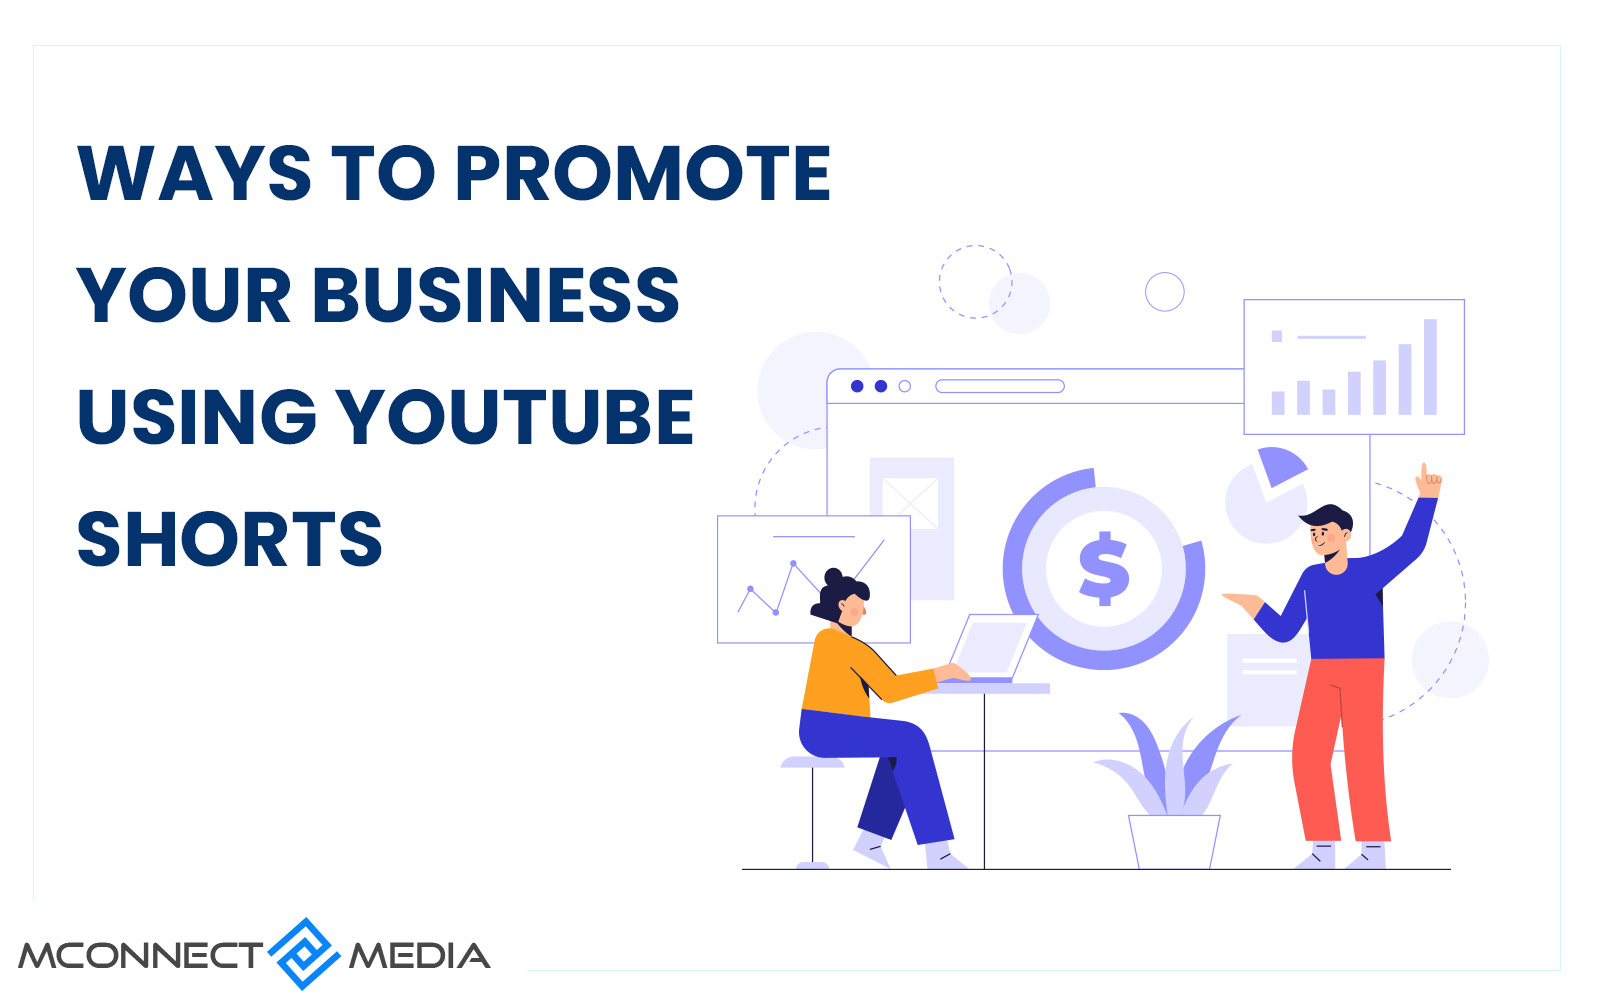 Top 5 Ways To Promote Your Business Using YouTube Shorts